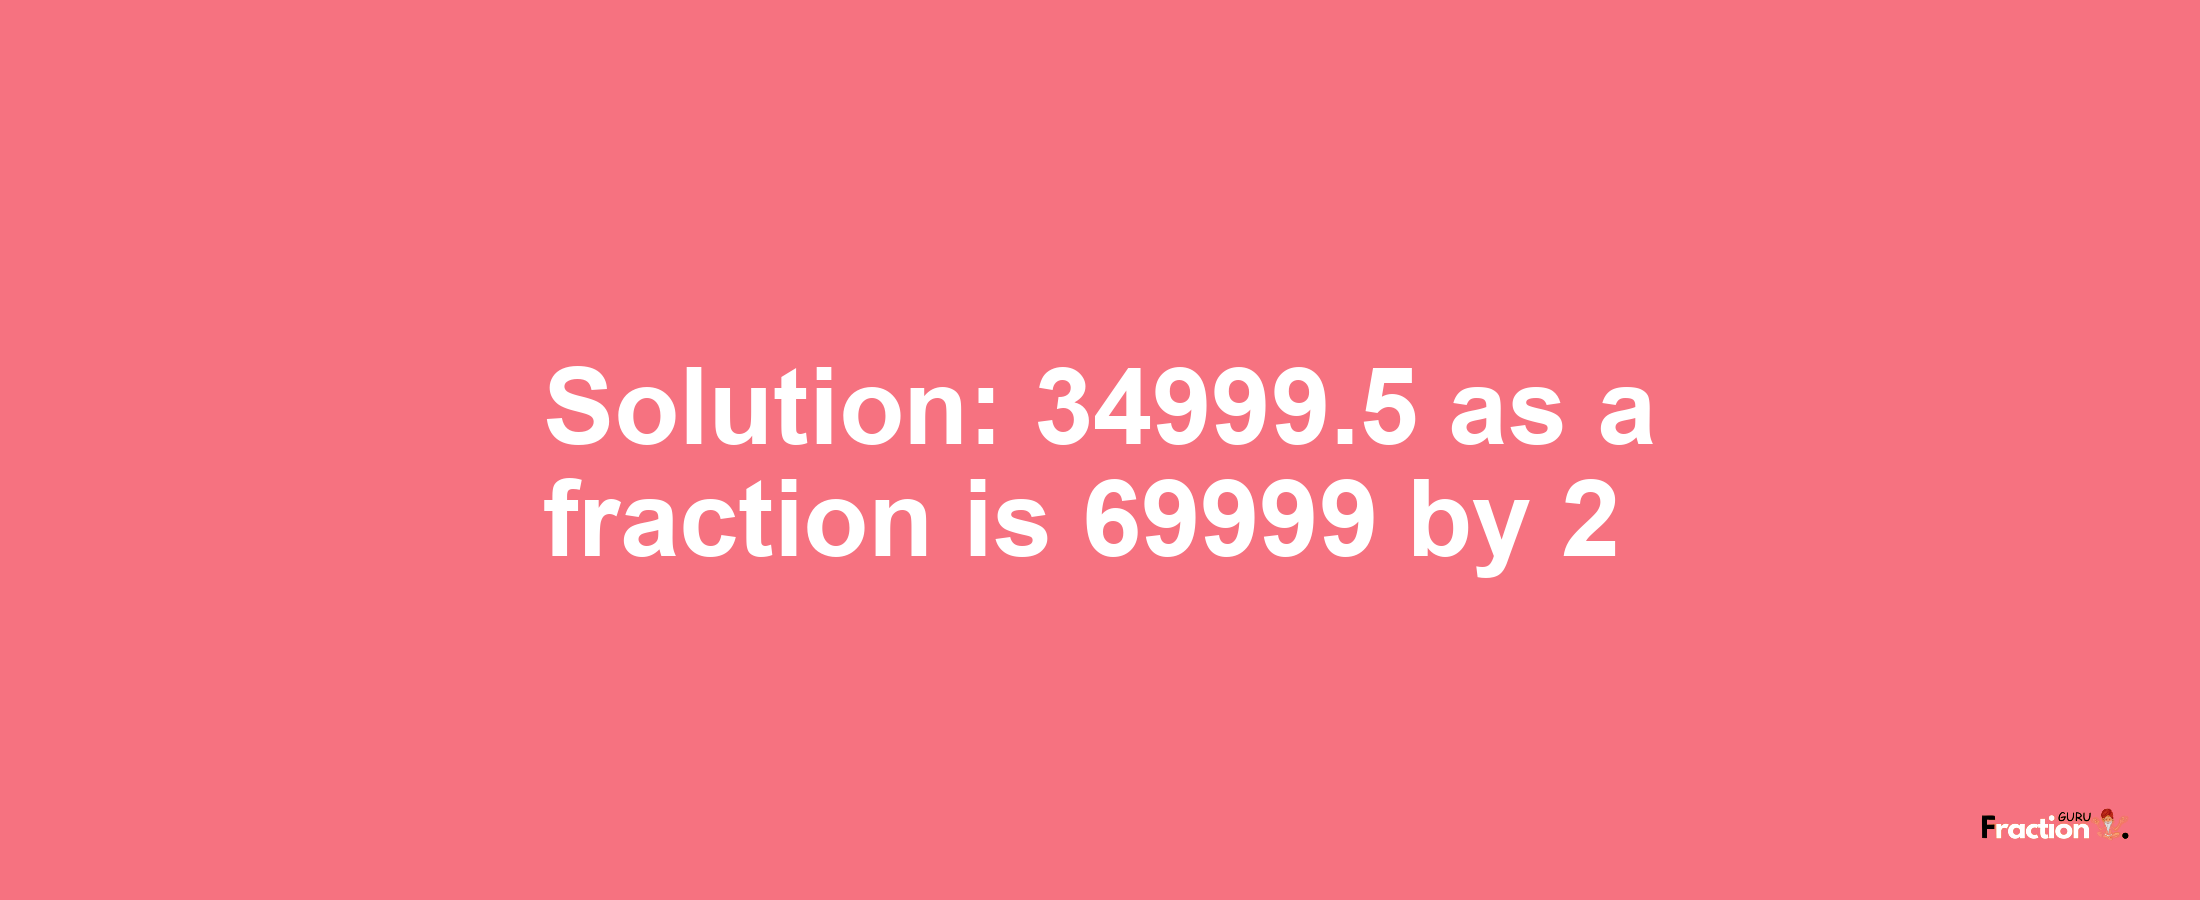 Solution:34999.5 as a fraction is 69999/2